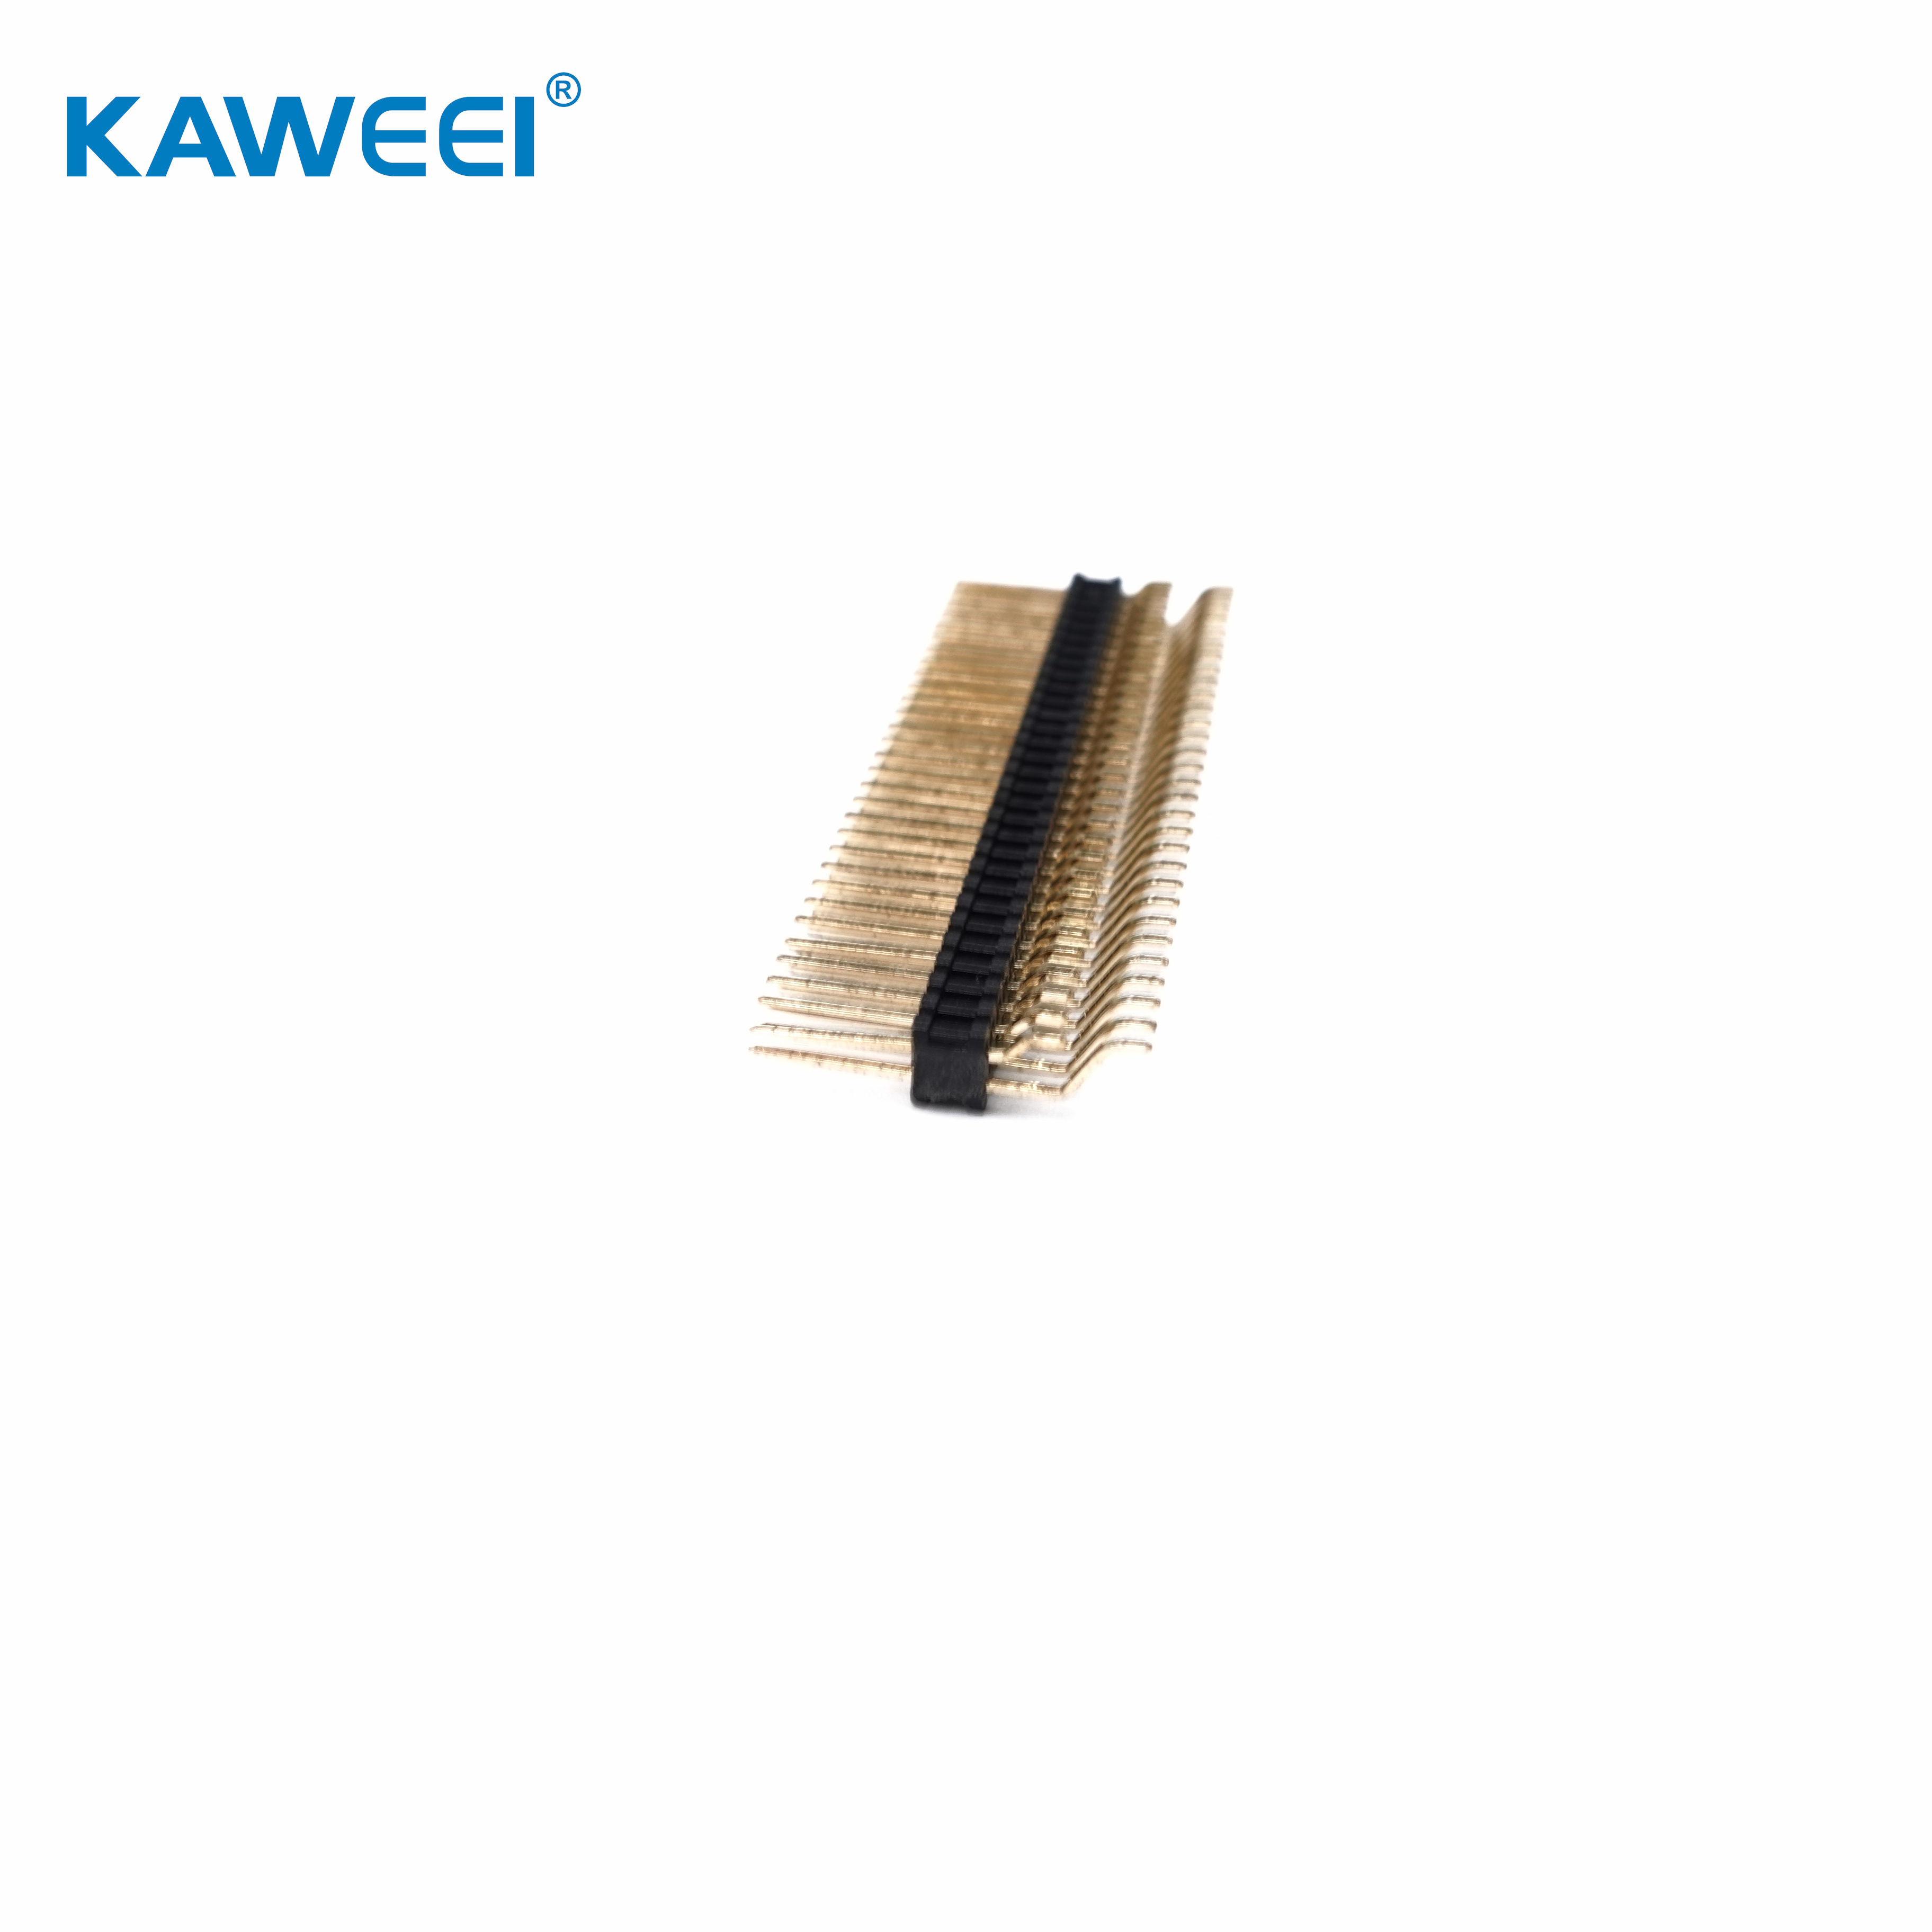 2.0mm pitch pin header right angle type Featured Image